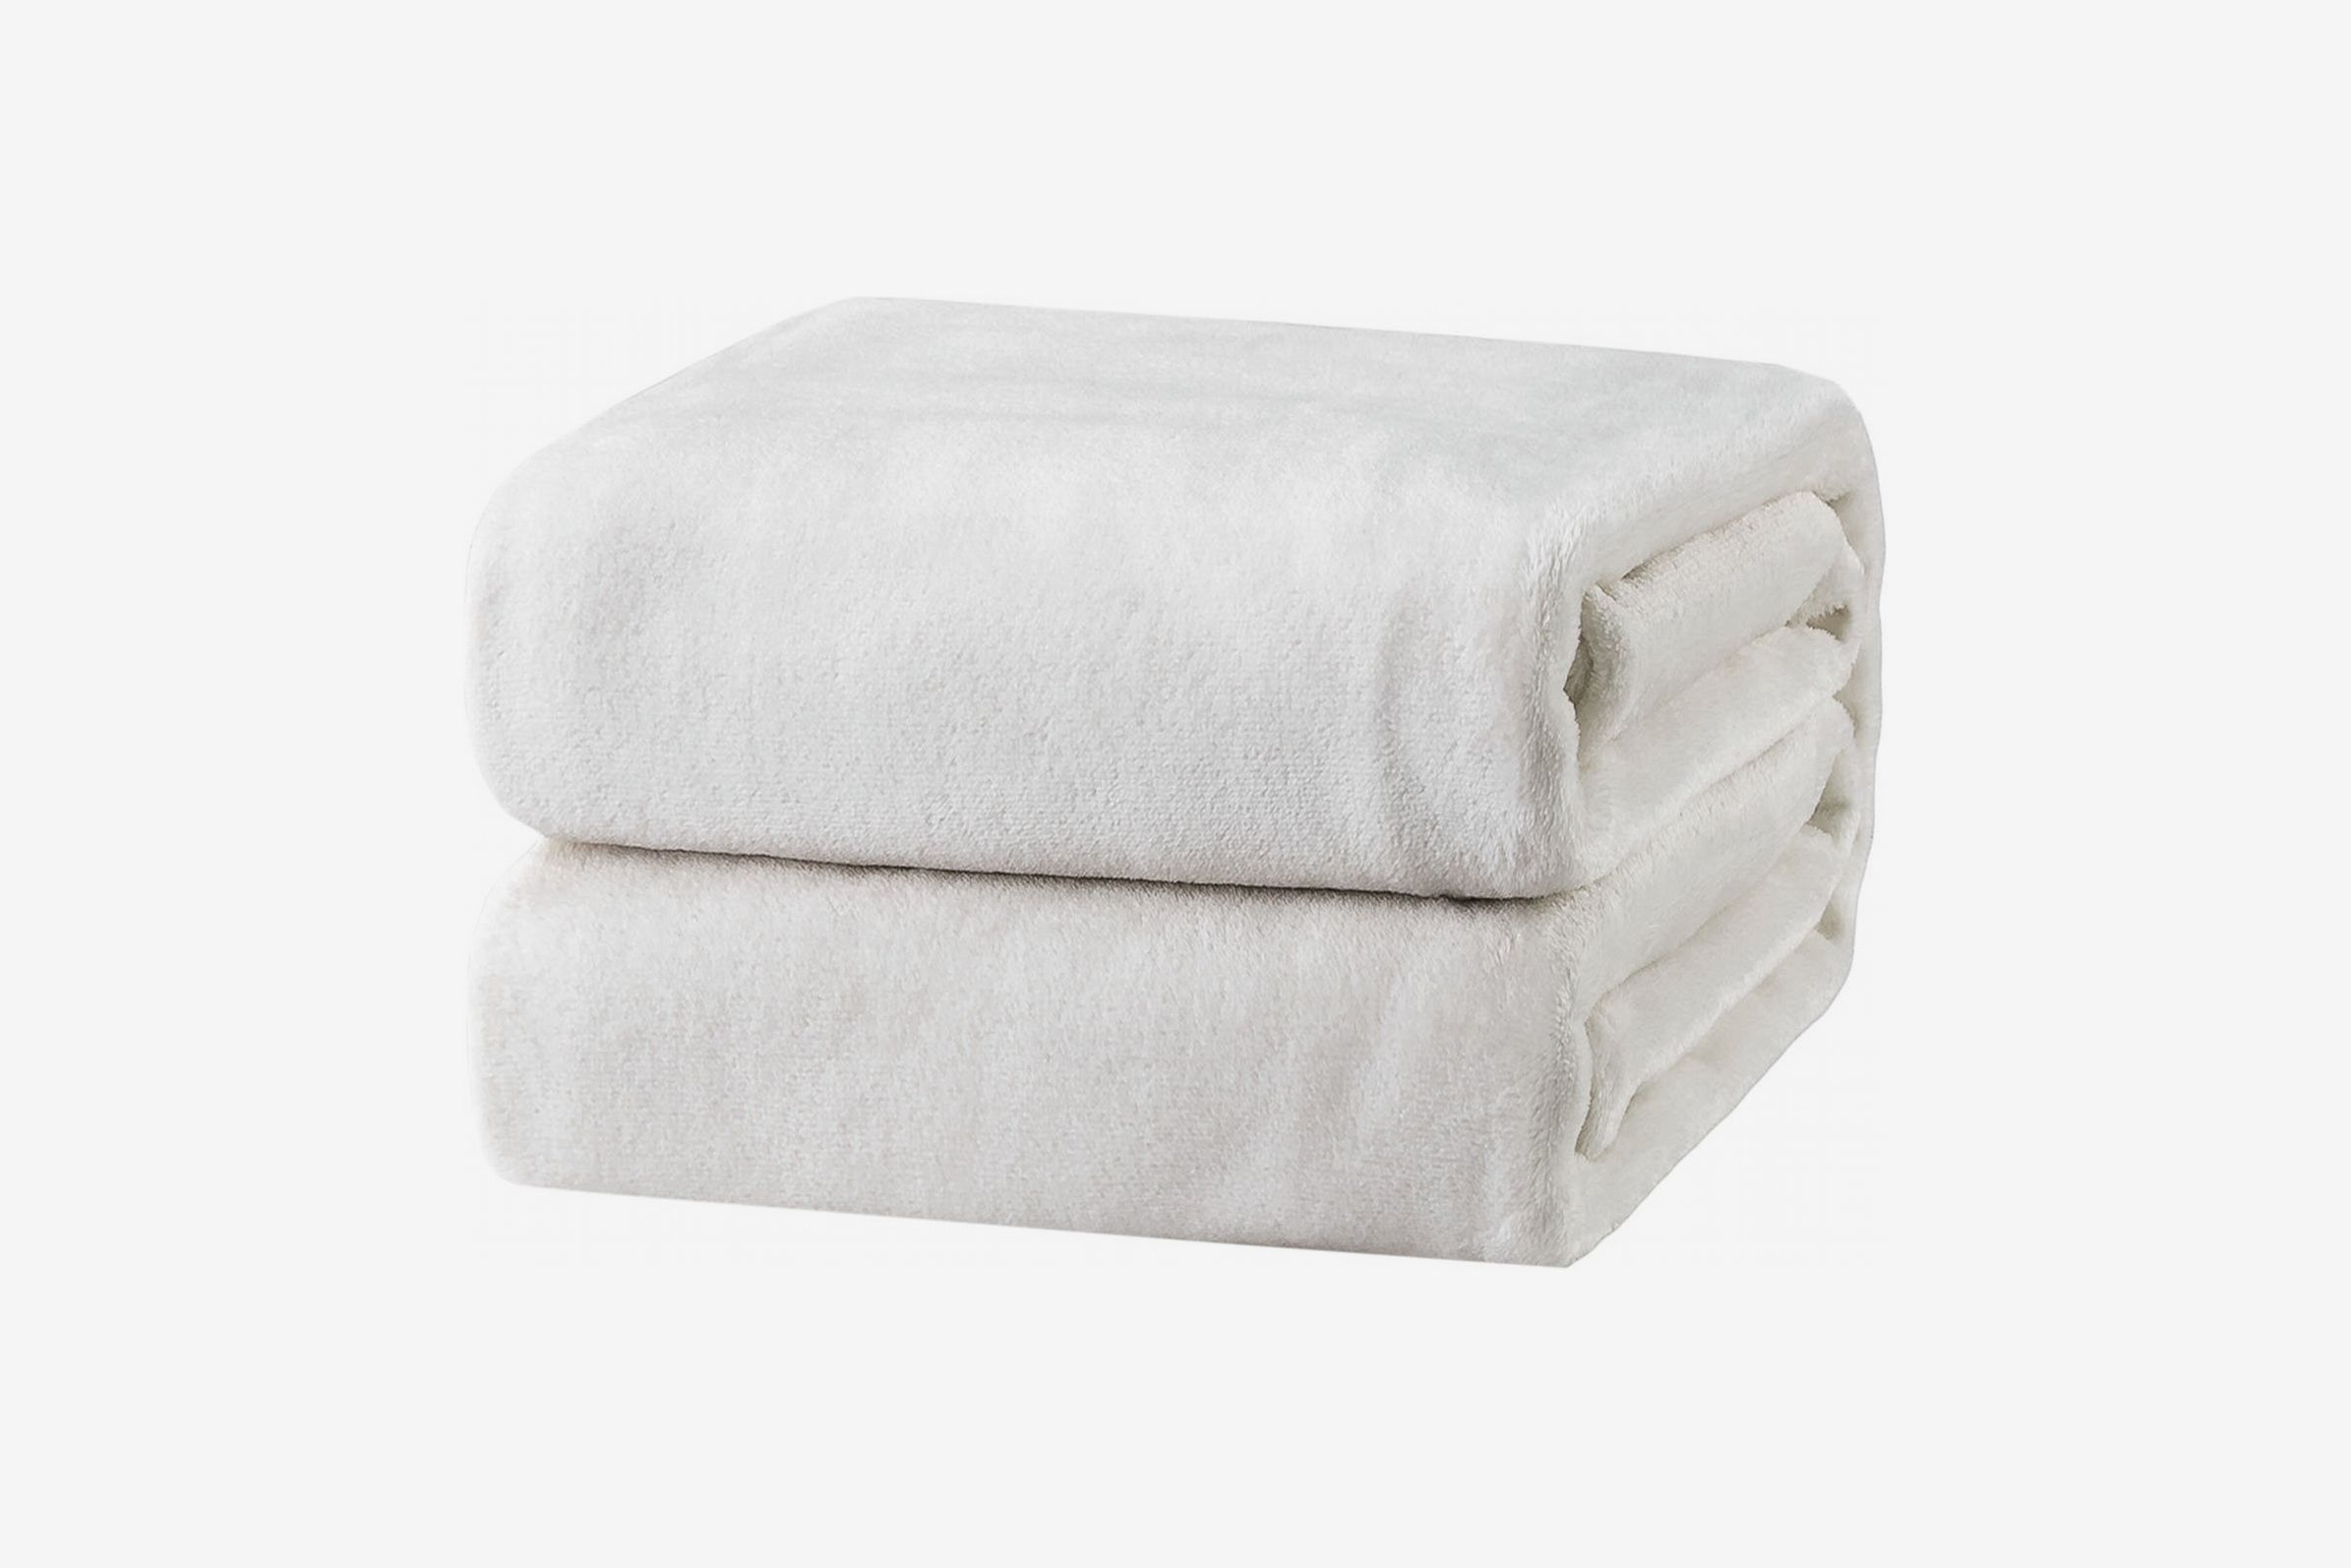 Soft Blanket Lightweight Luxury Comfortable Throw Blanket Fluffy Plush Blanket for Bed or Couch M, White 